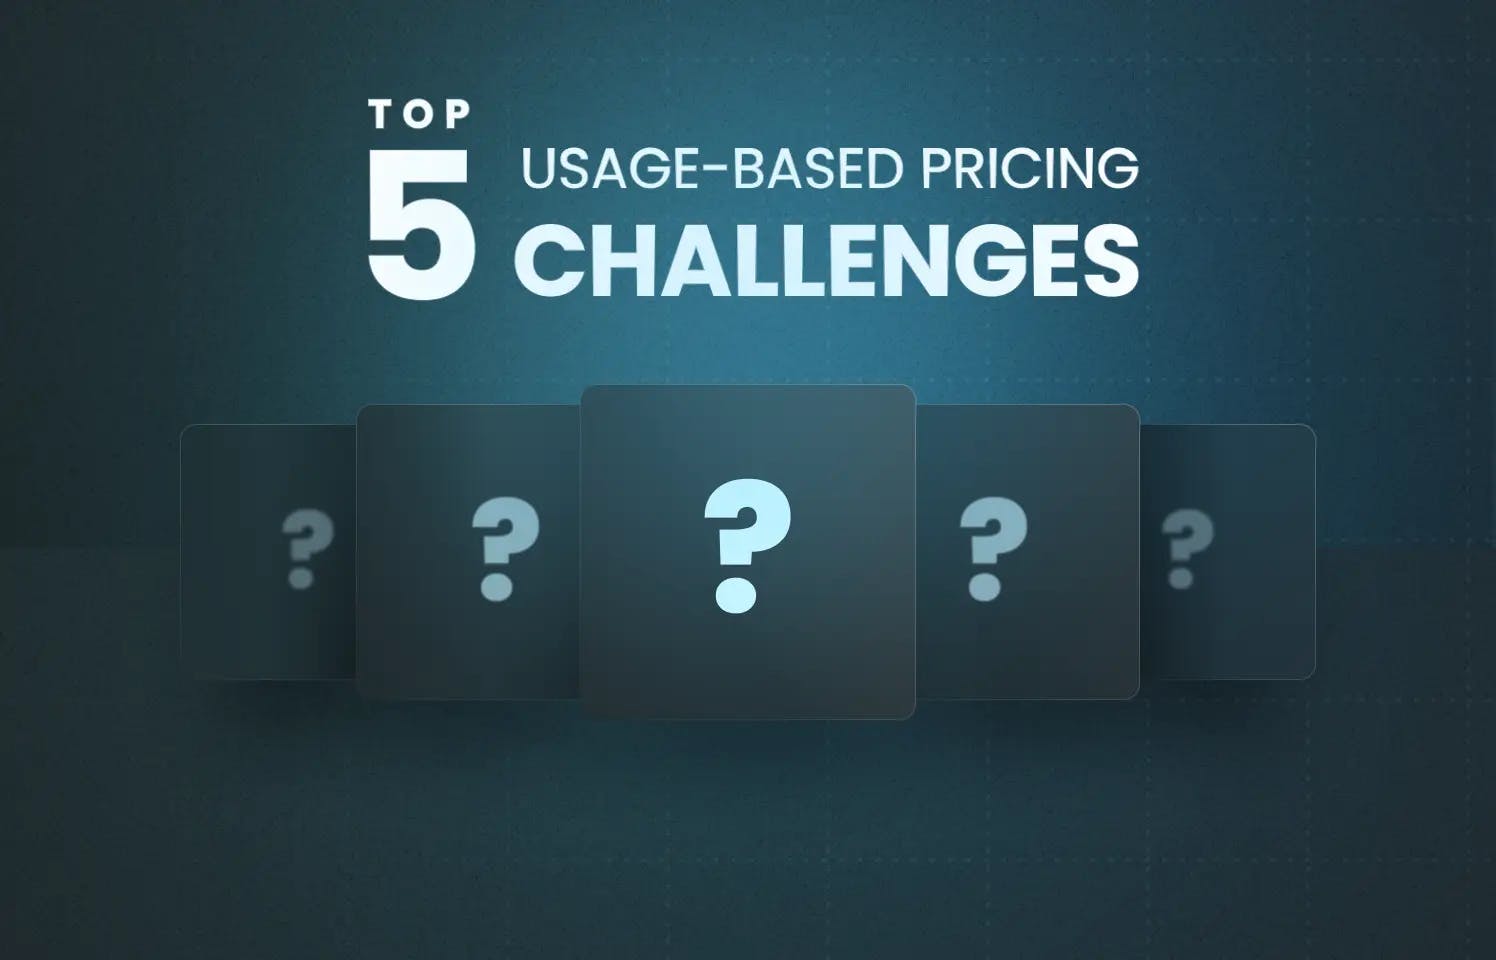 Top 5 Usage-Based Pricing Challenges